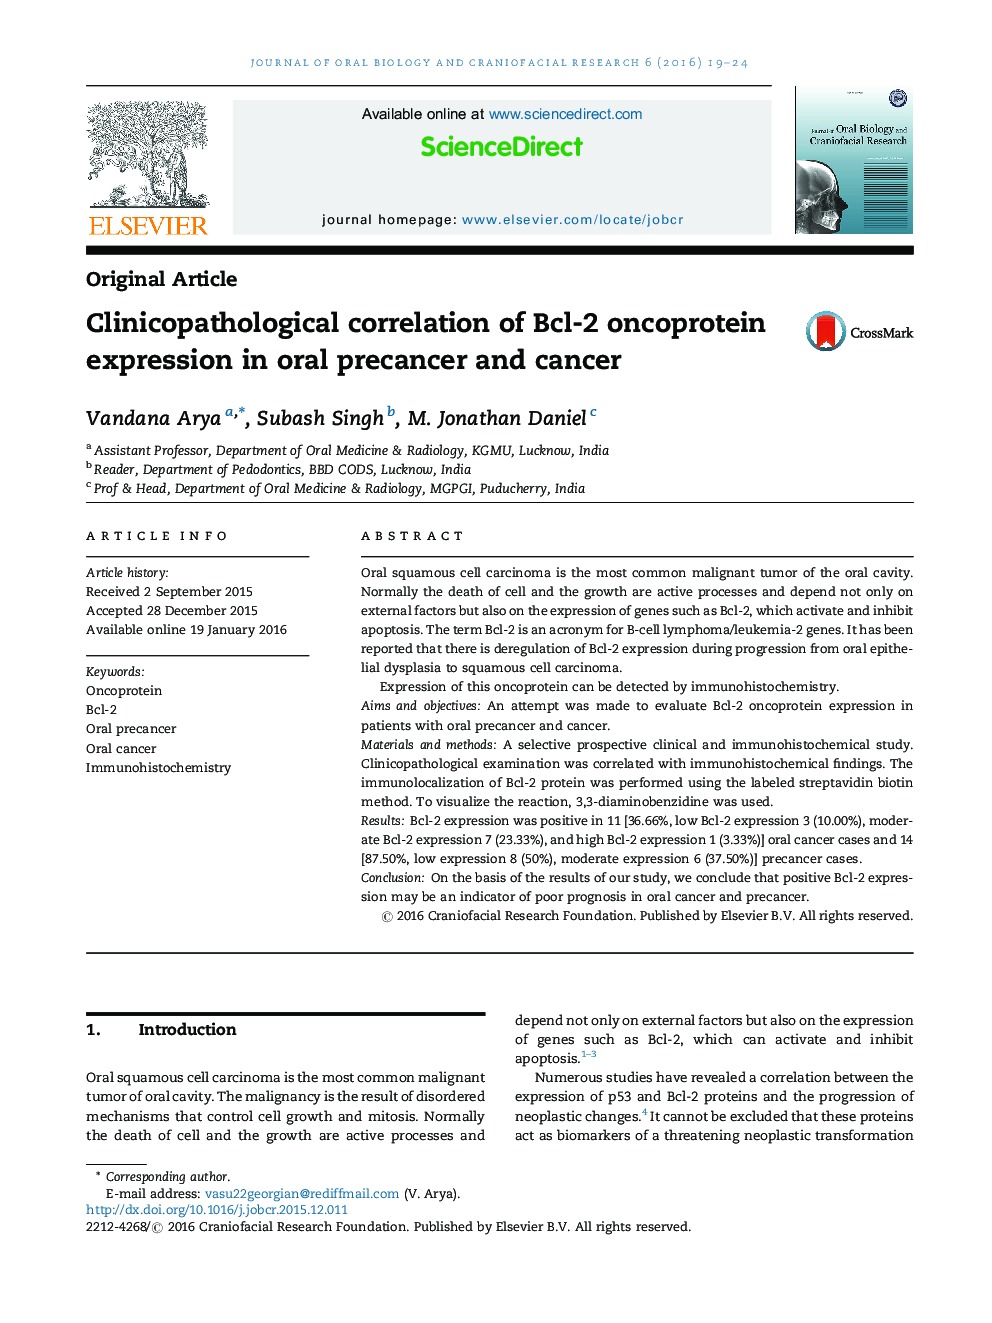 Clinicopathological correlation of Bcl-2 oncoprotein expression in oral precancer and cancer